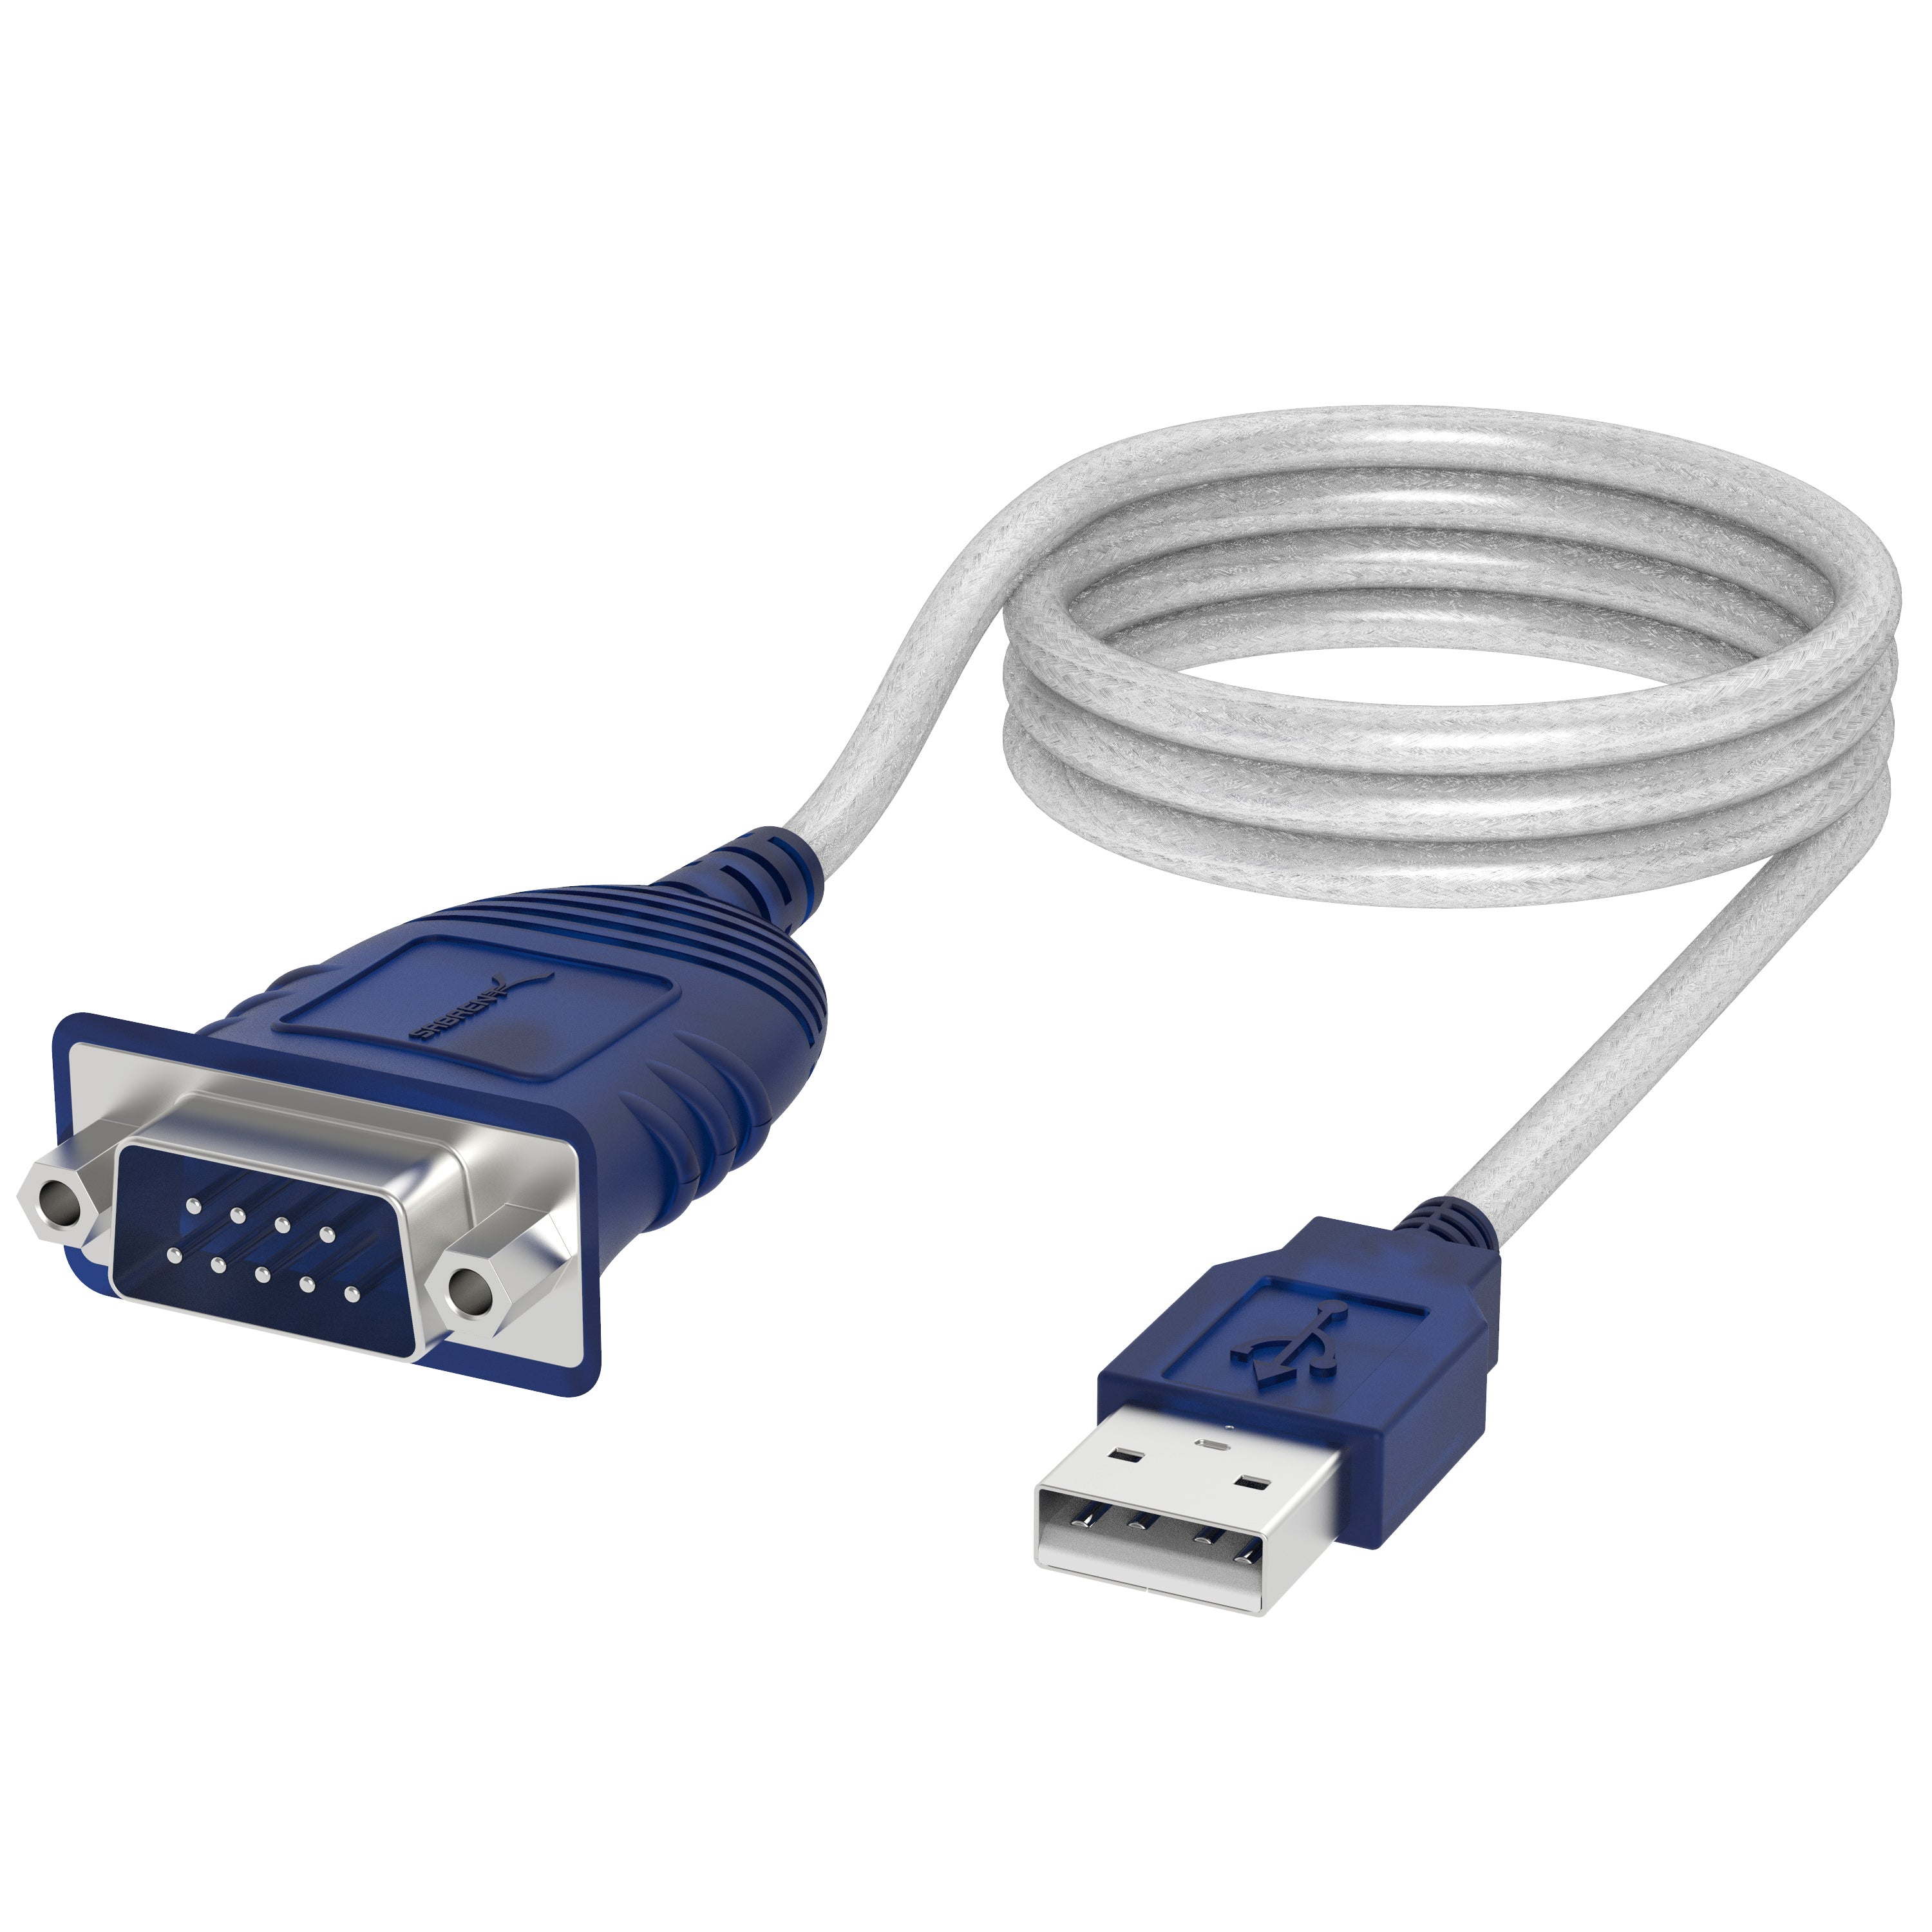 USB 2.0 Serial DB9 Male (9 RS232 Cable Adapter -